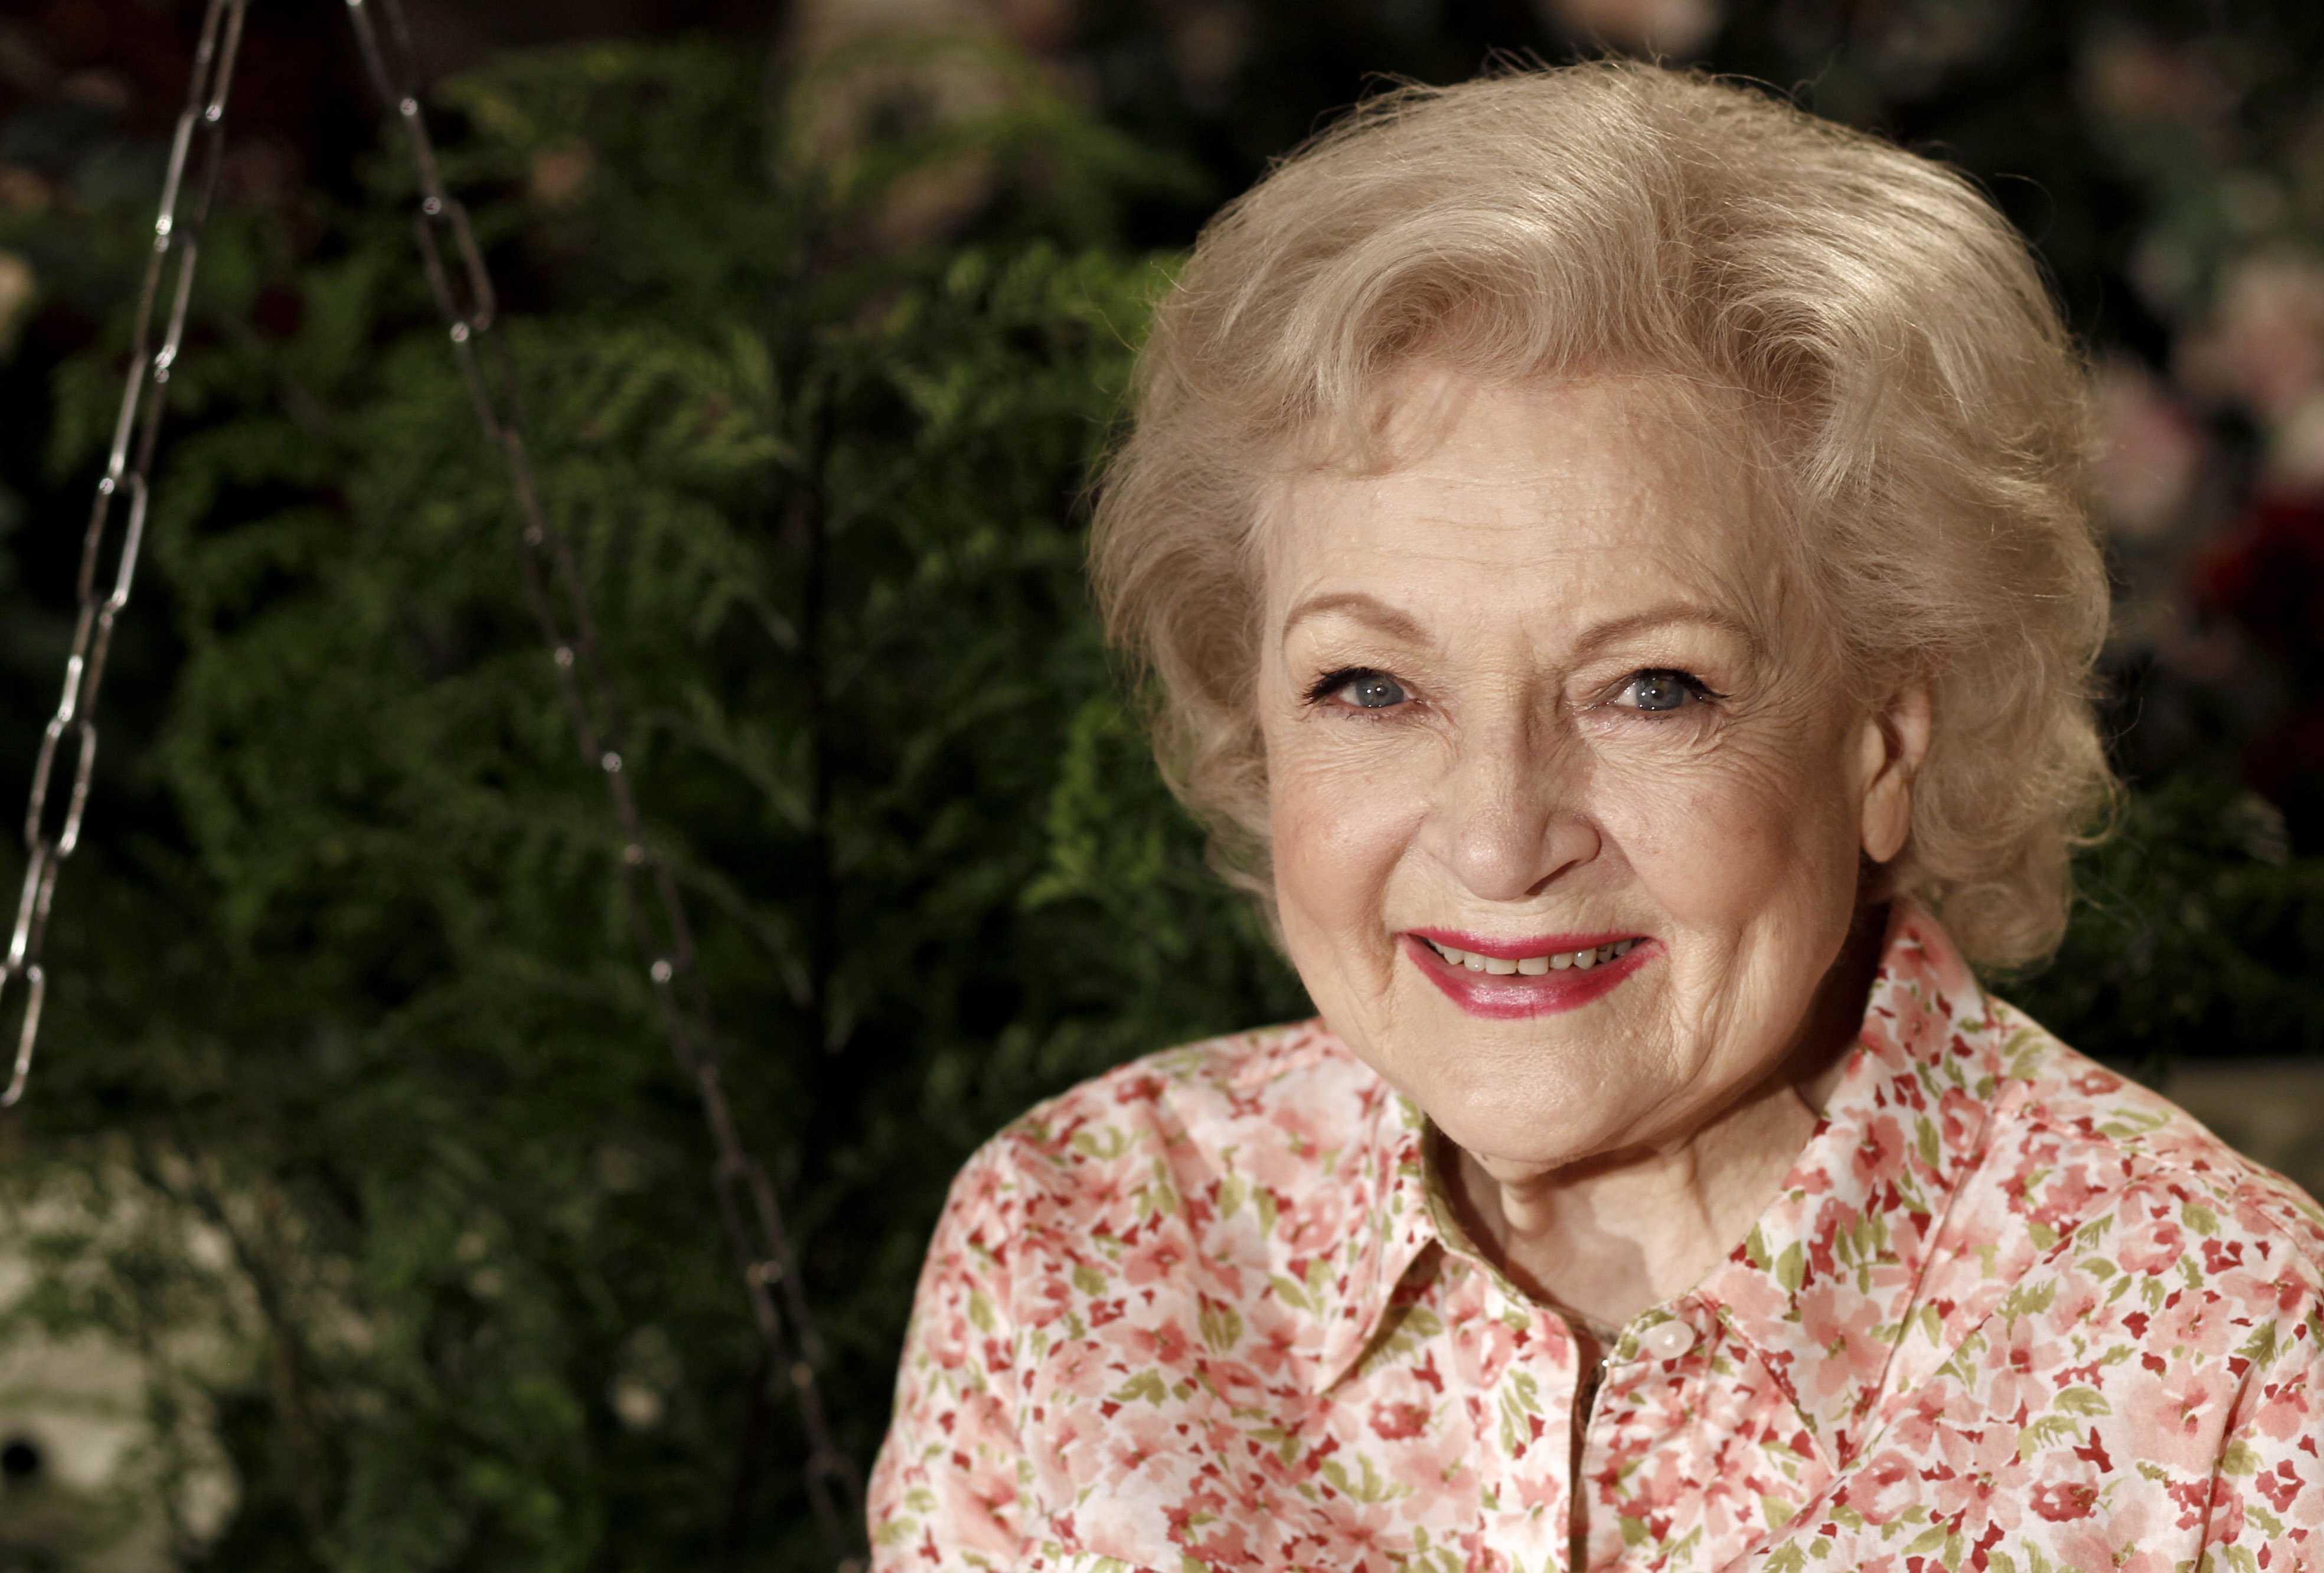 Betty White, 'Golden Girls' actor and comedian whose career